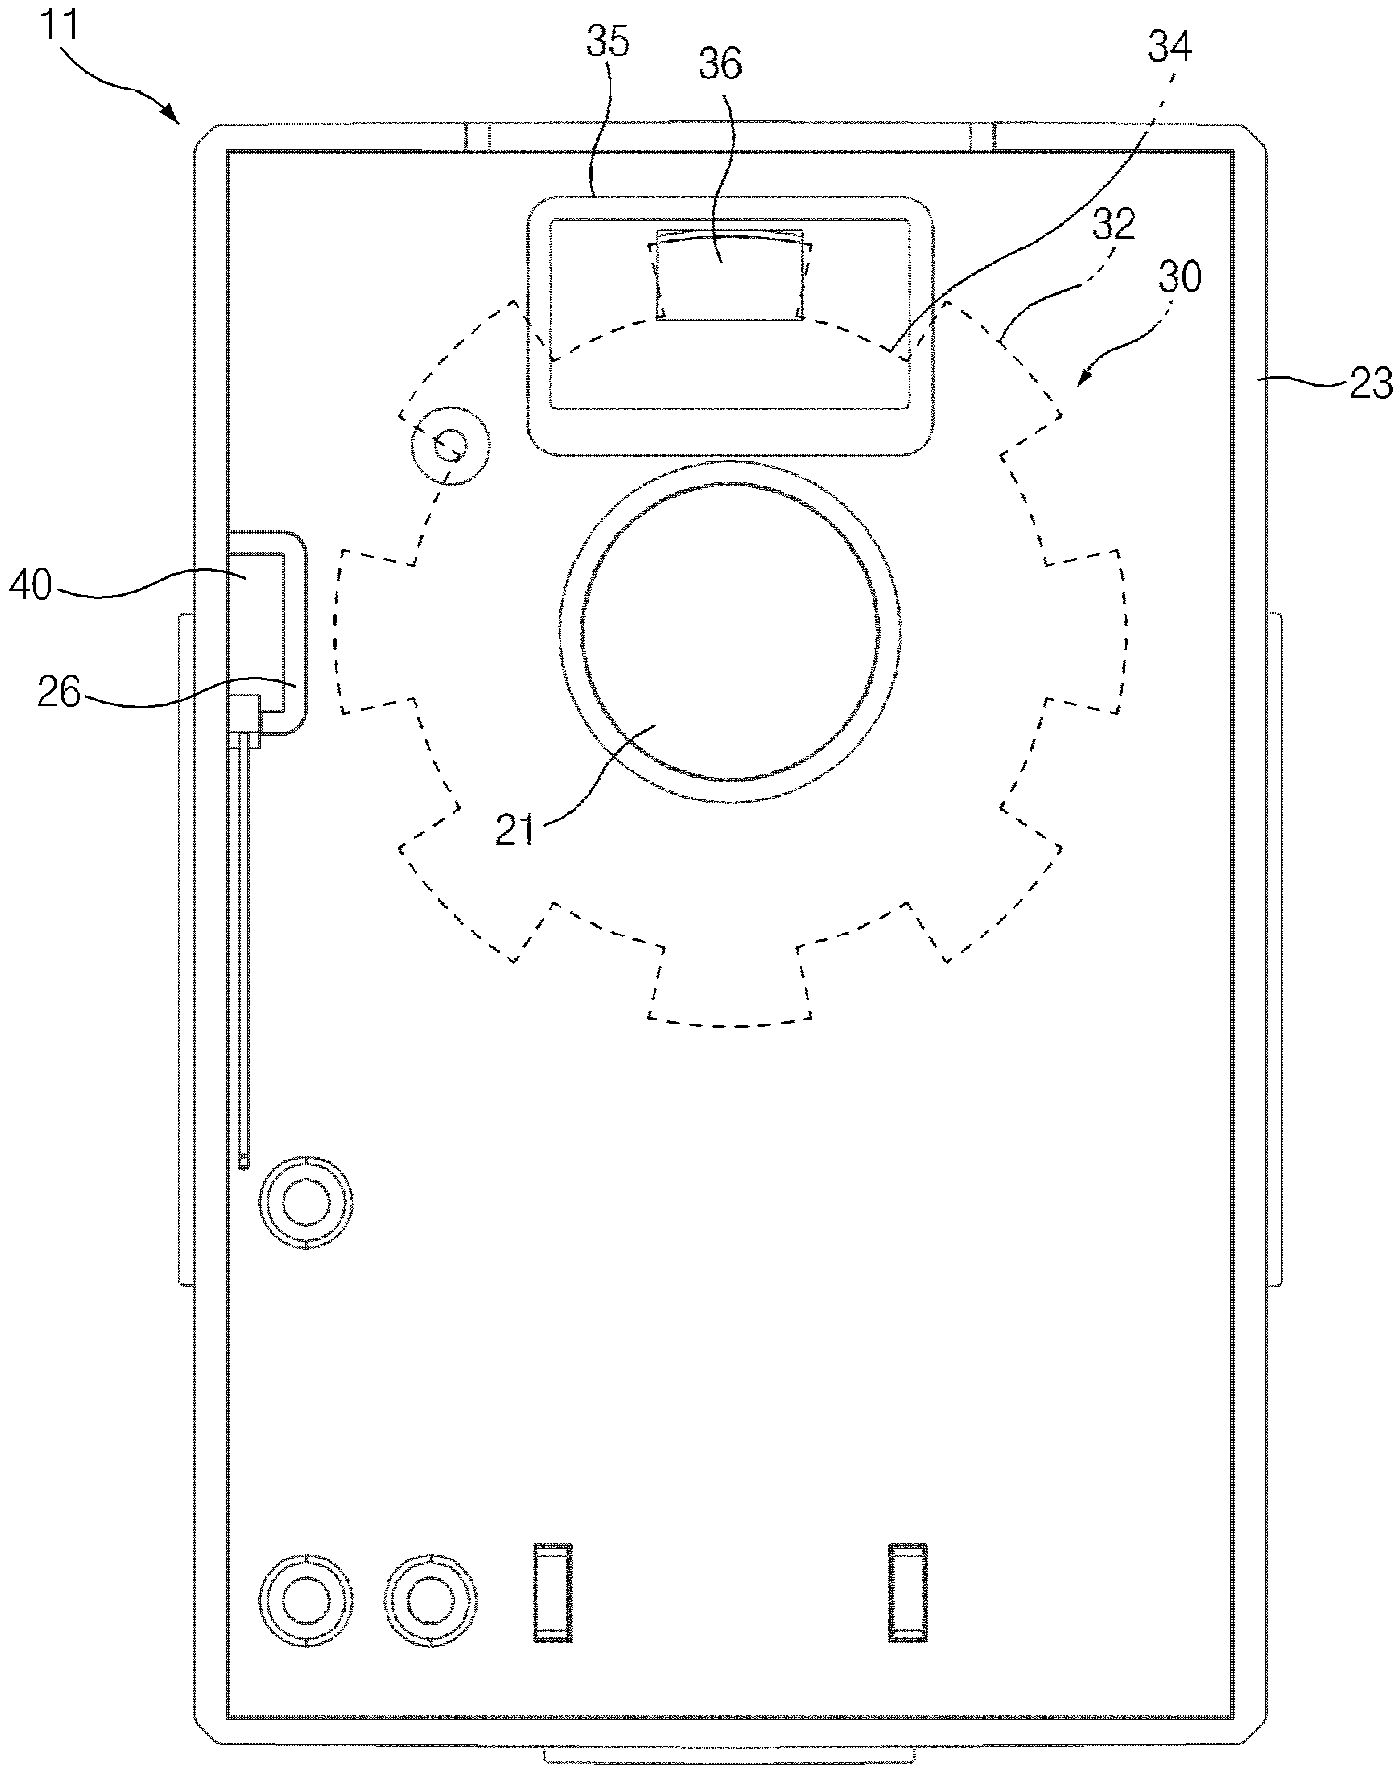 Tablet medicine cassette for device for wrapping medicine and method for operating same